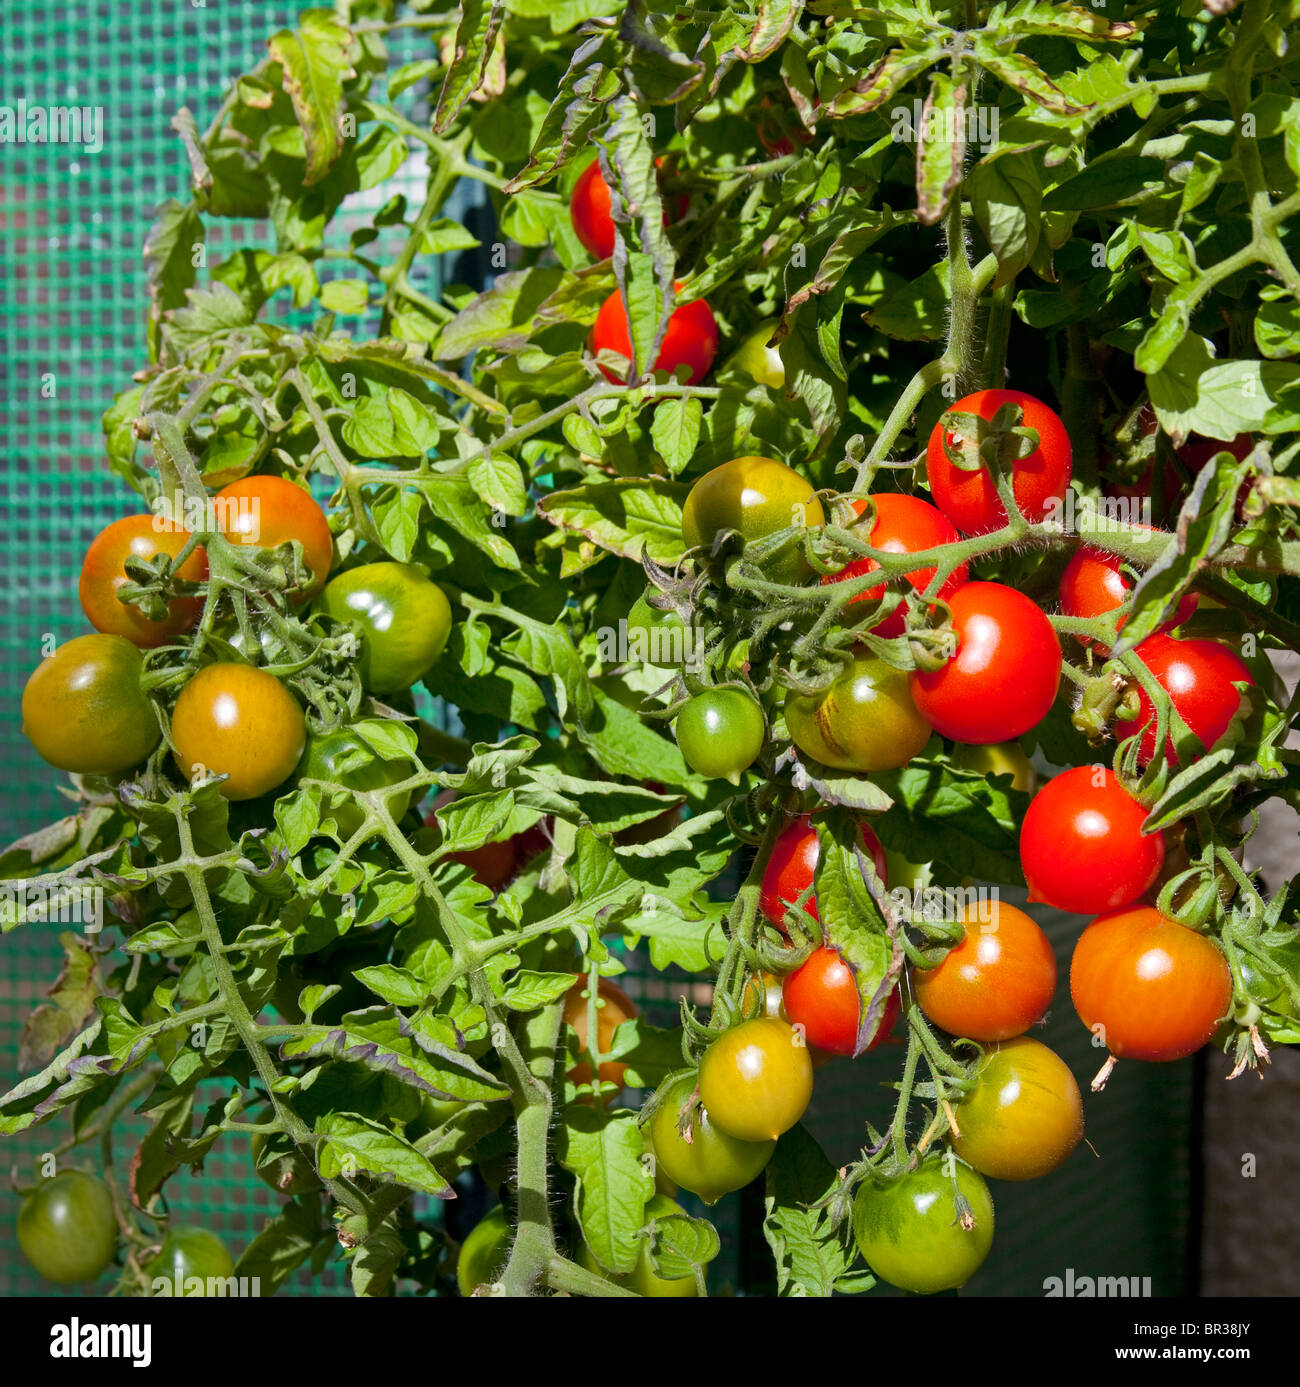 Plant of of red ripe and green unripe tomatoes Stock Photo